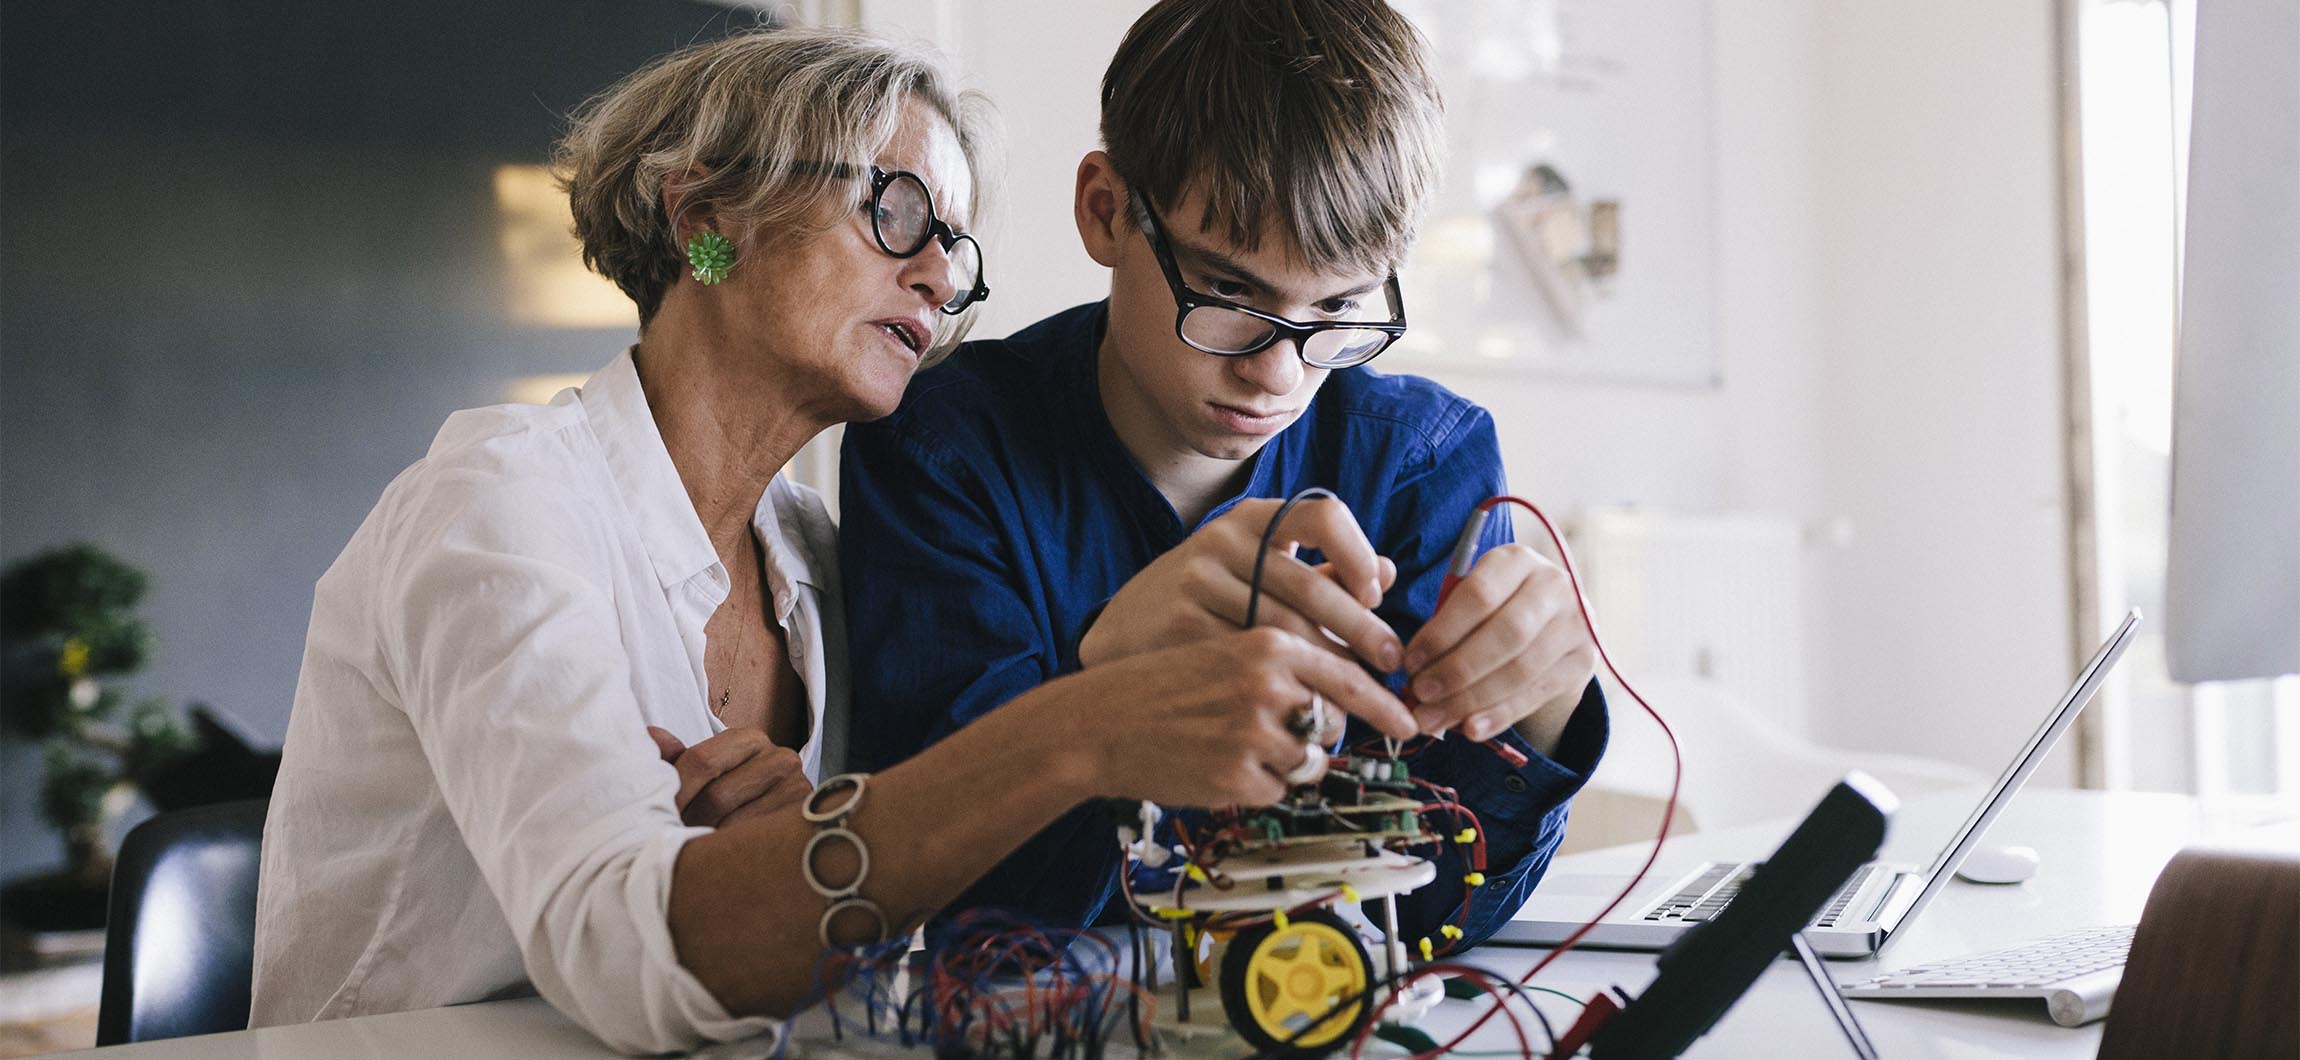 Mother and son working on electronic project together. Mother is showing son how to use voltage meter.